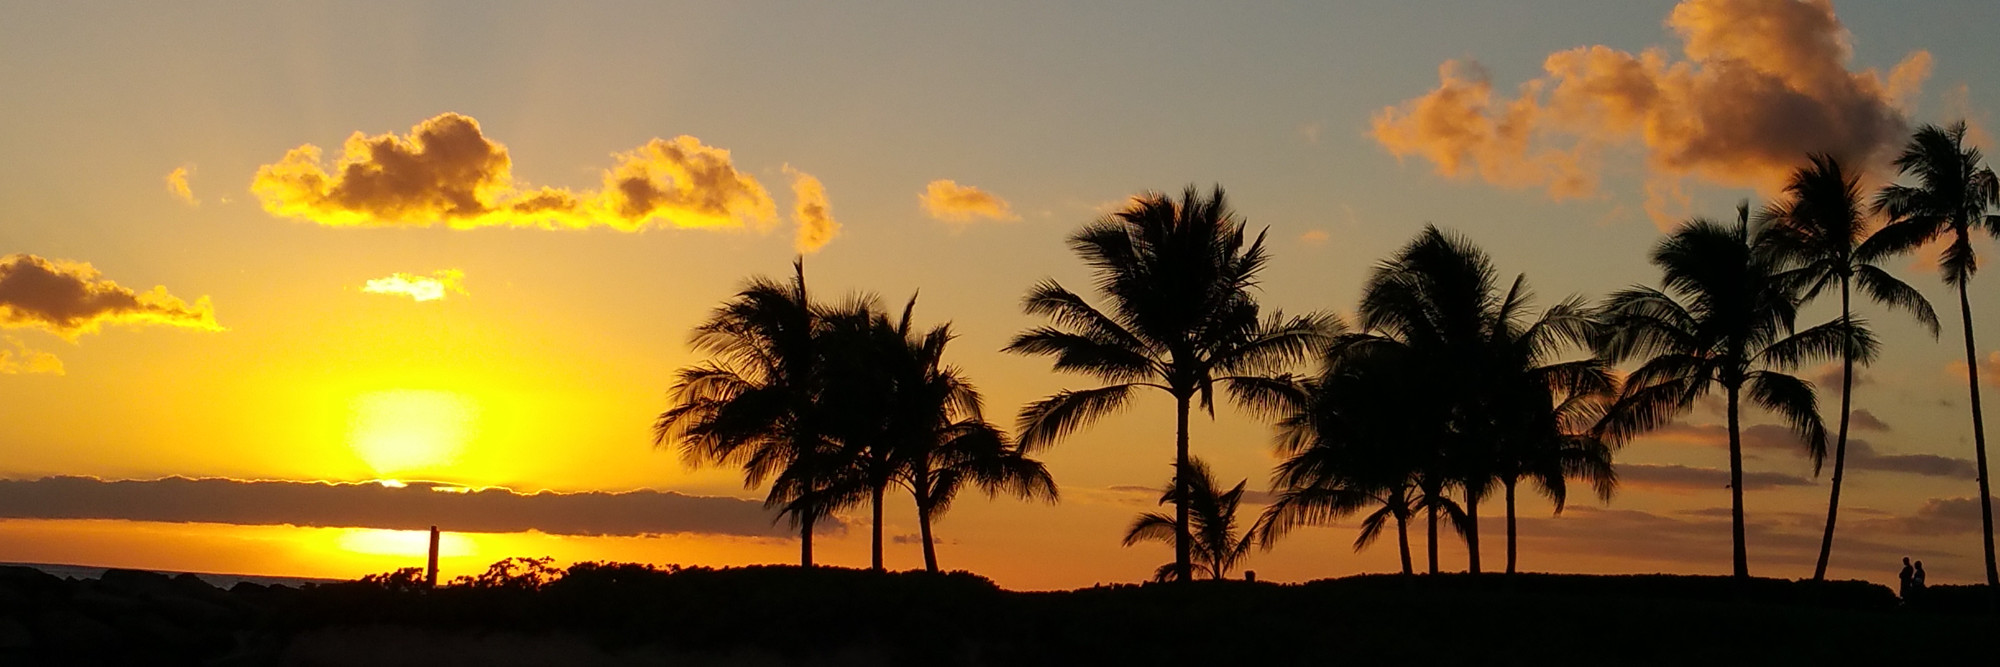 Sunset at a beach with palm trees